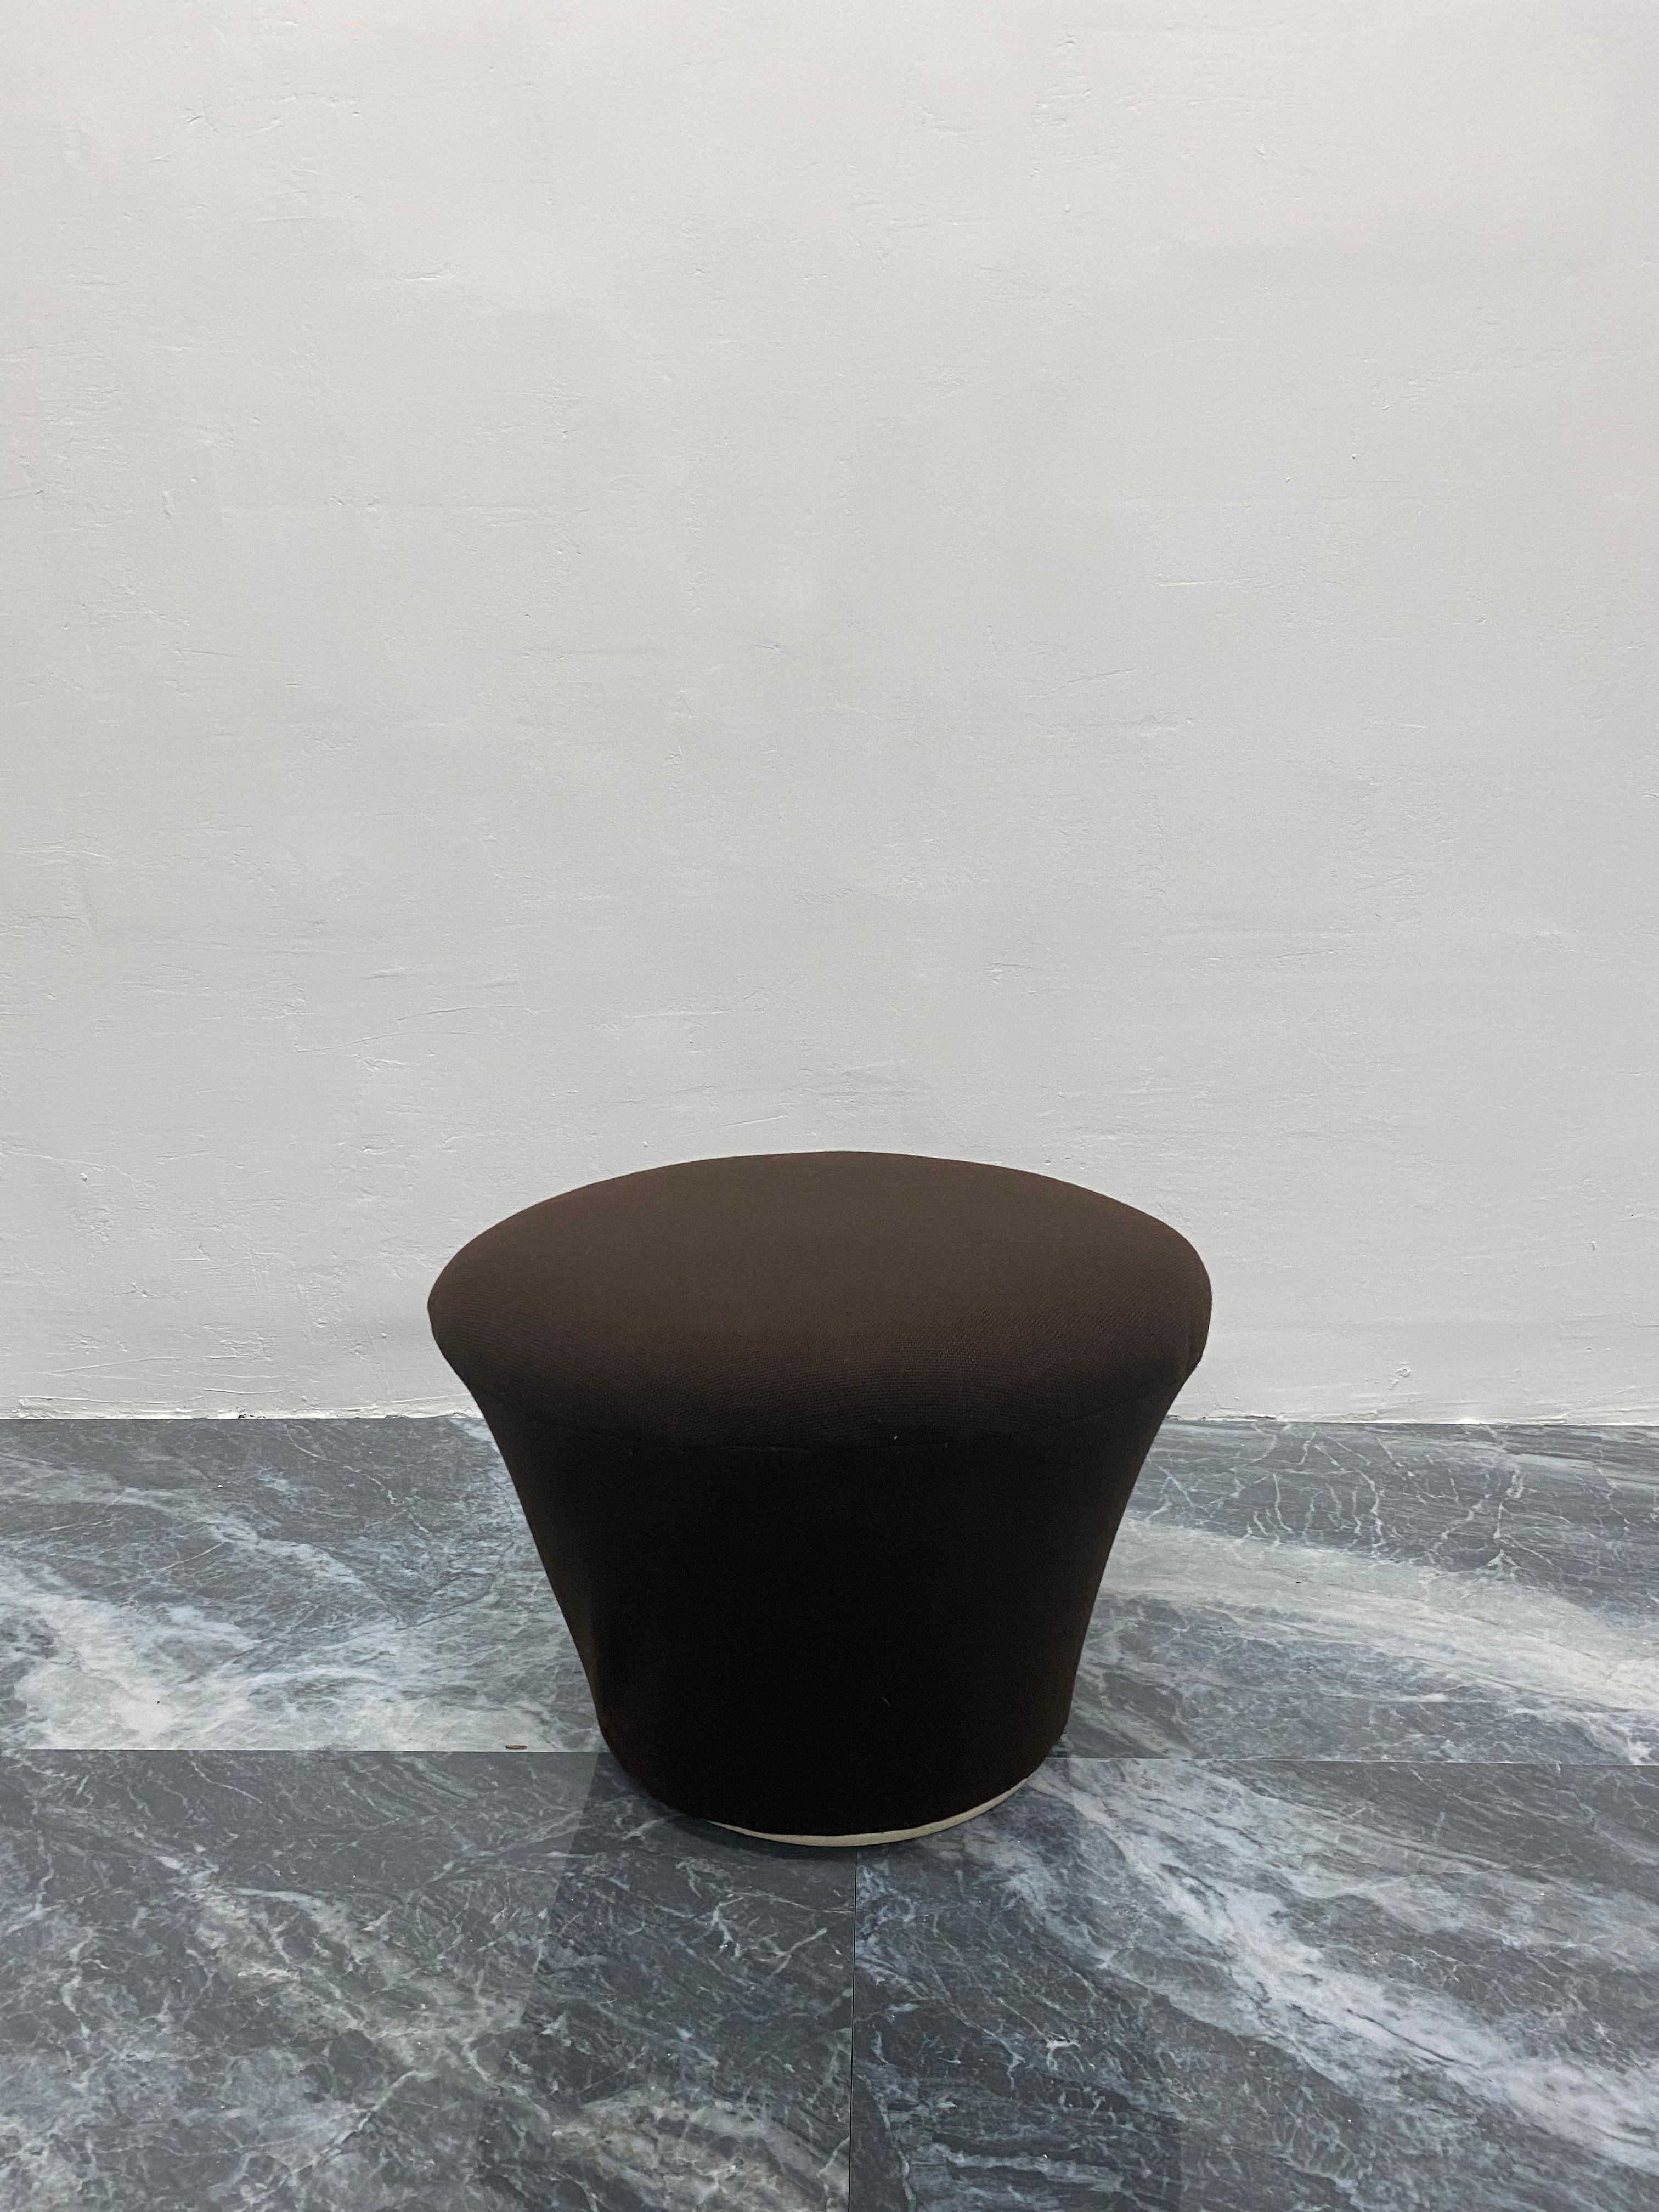 Original, authentic Mushroom stool or ottoman designed by Pierre Paulin for Artifort, 1960s. Maintains original brown Tonus fabric. Use with existing fabric or have reupholstered.